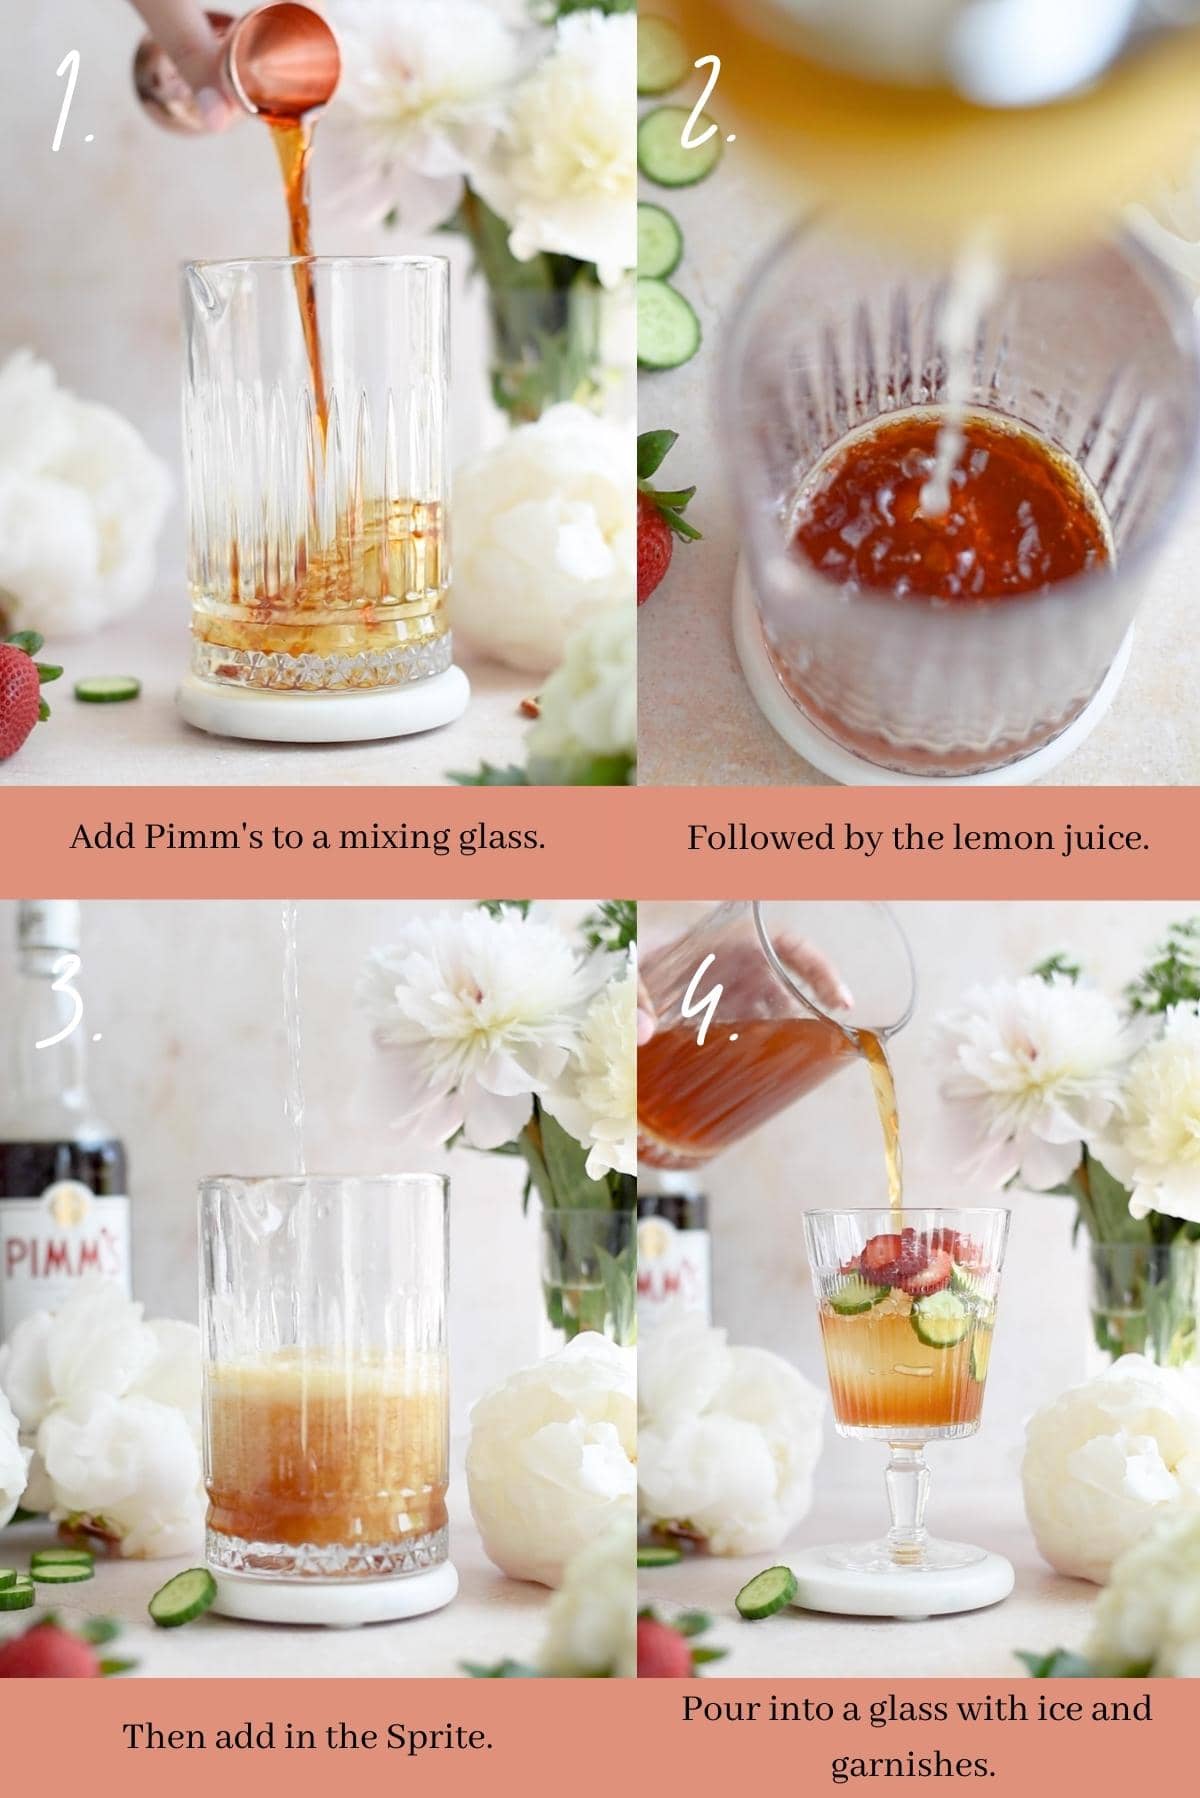 A collage showing how to make a Pimm's Cup.